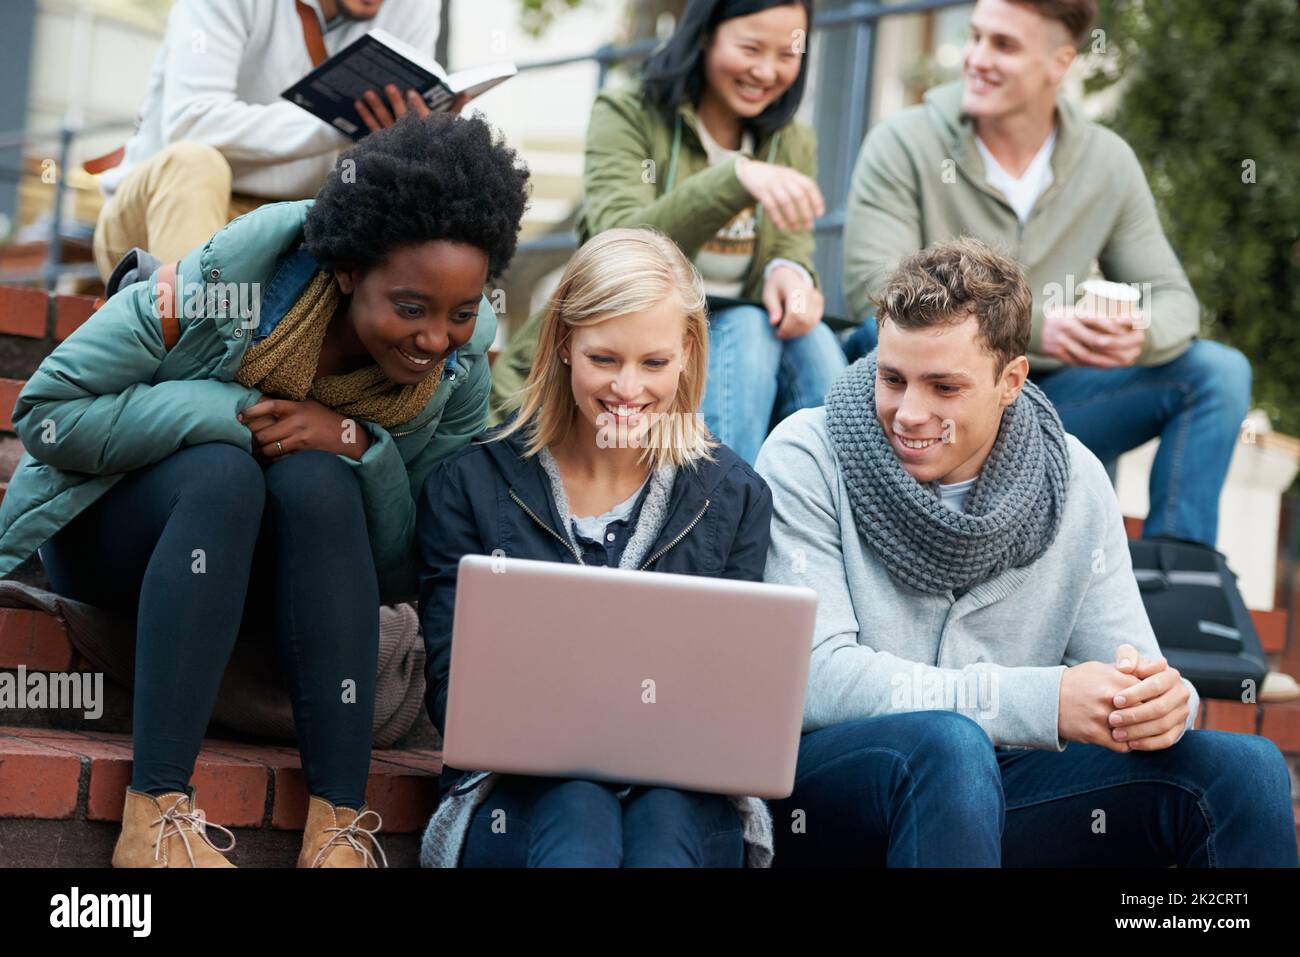 We are eager to learn. Shot of a group of smiling university students looking at something on a laptop. Stock Photo